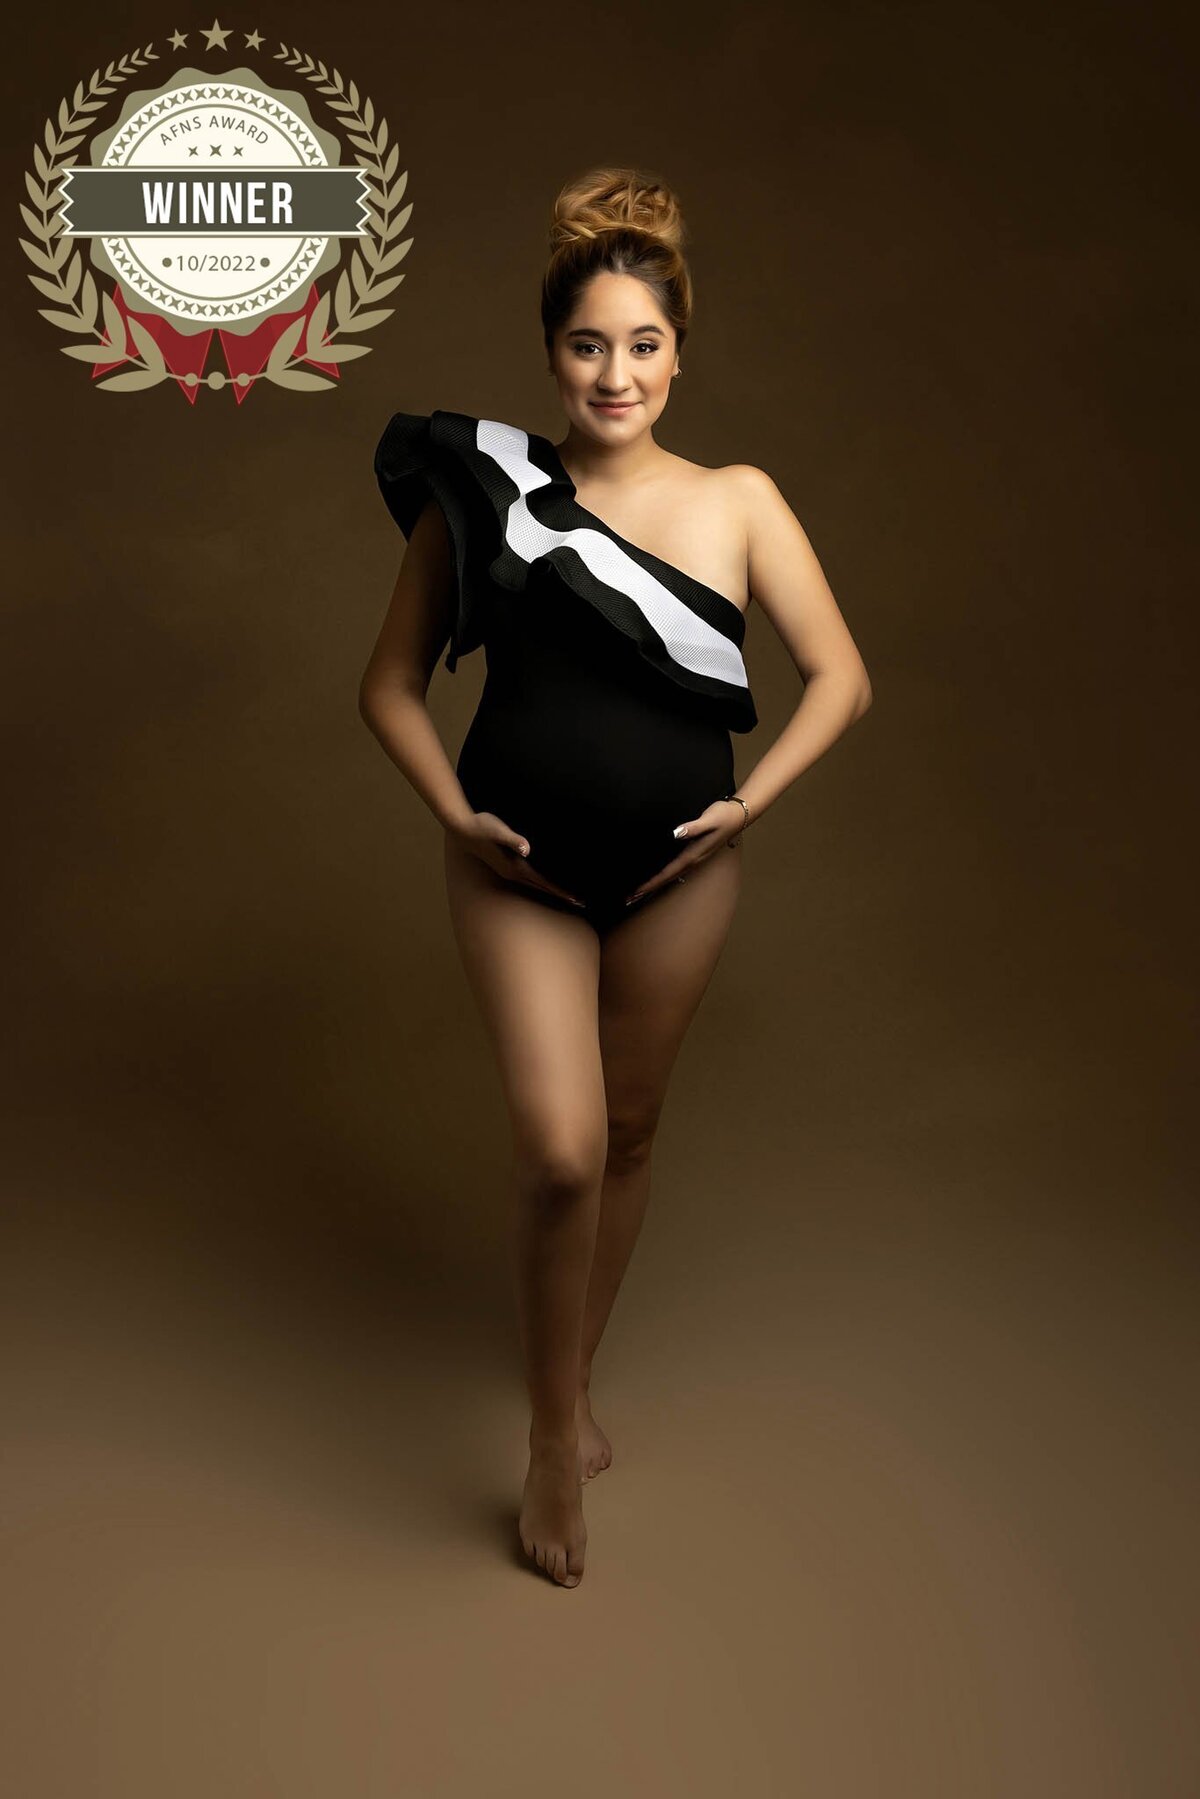 A woman wears a swimsuit in a studio - with AFNS Award 2022  Badge